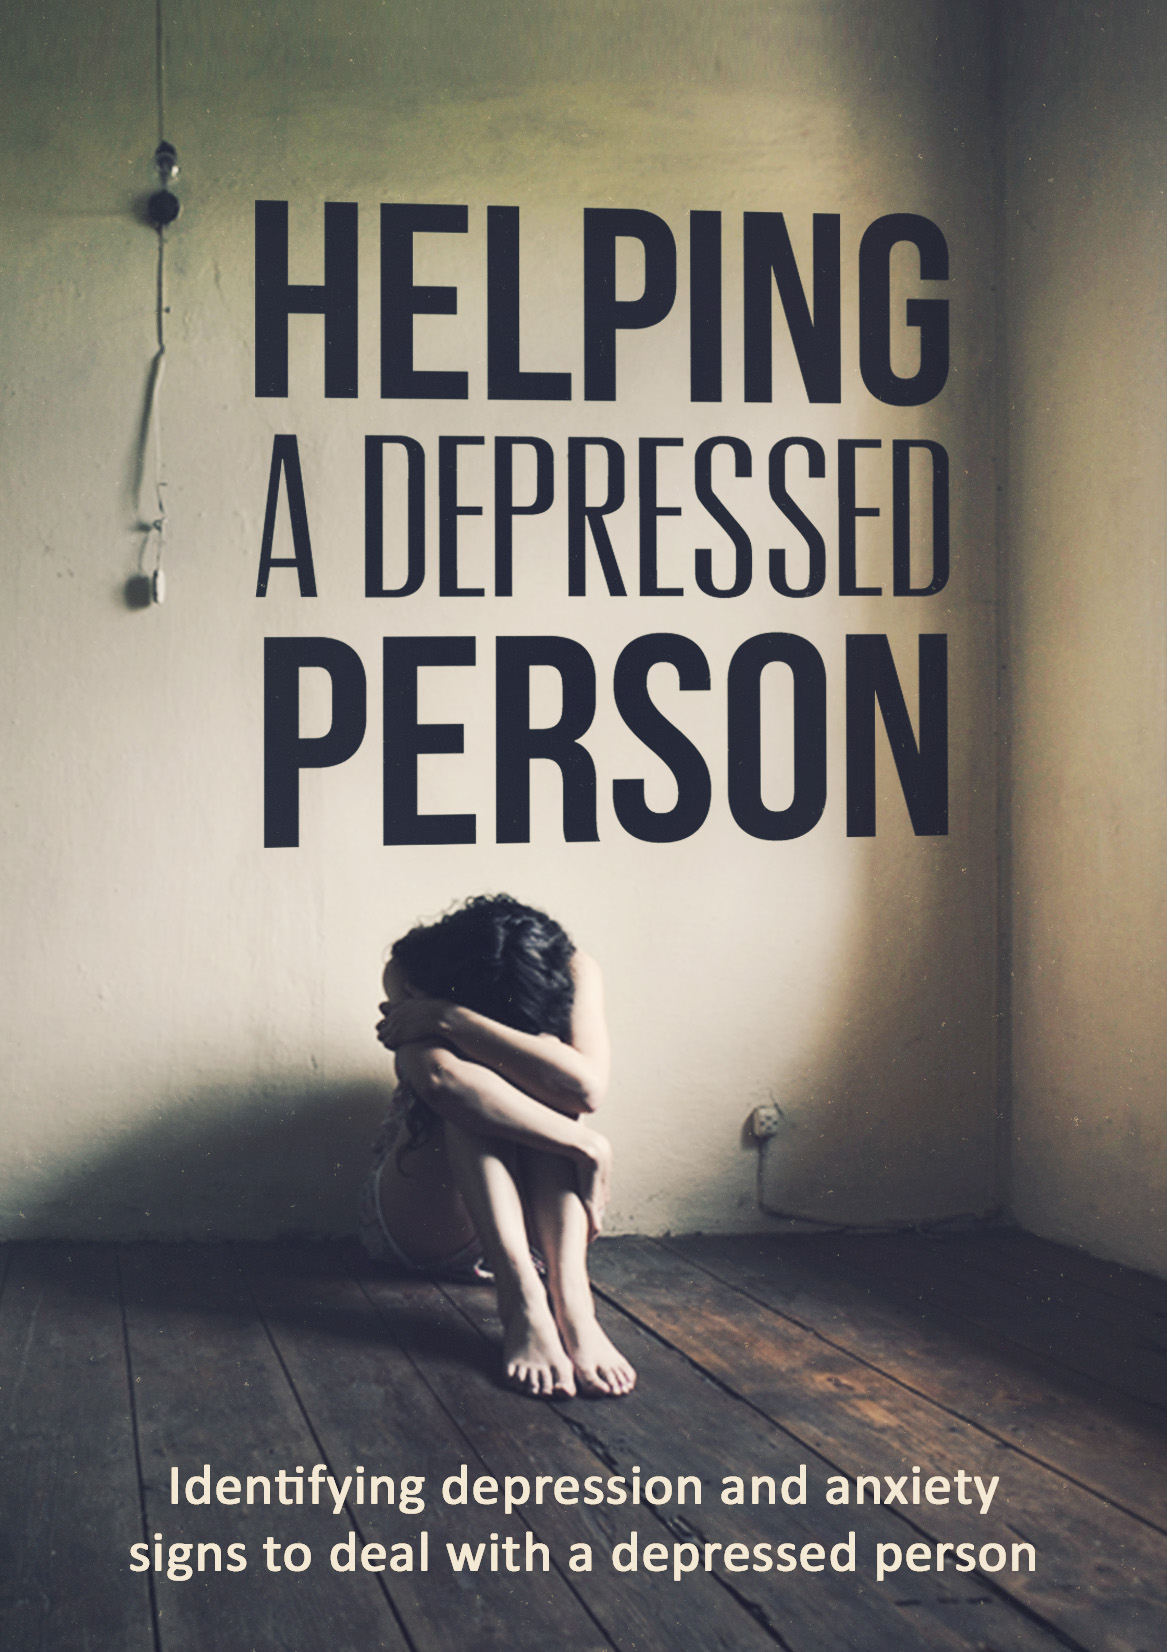 FREE: Helping a Depressed Person: Identifying Depression And Anxiety Signs To Deal With A Depressed Person by Audrey M Logan